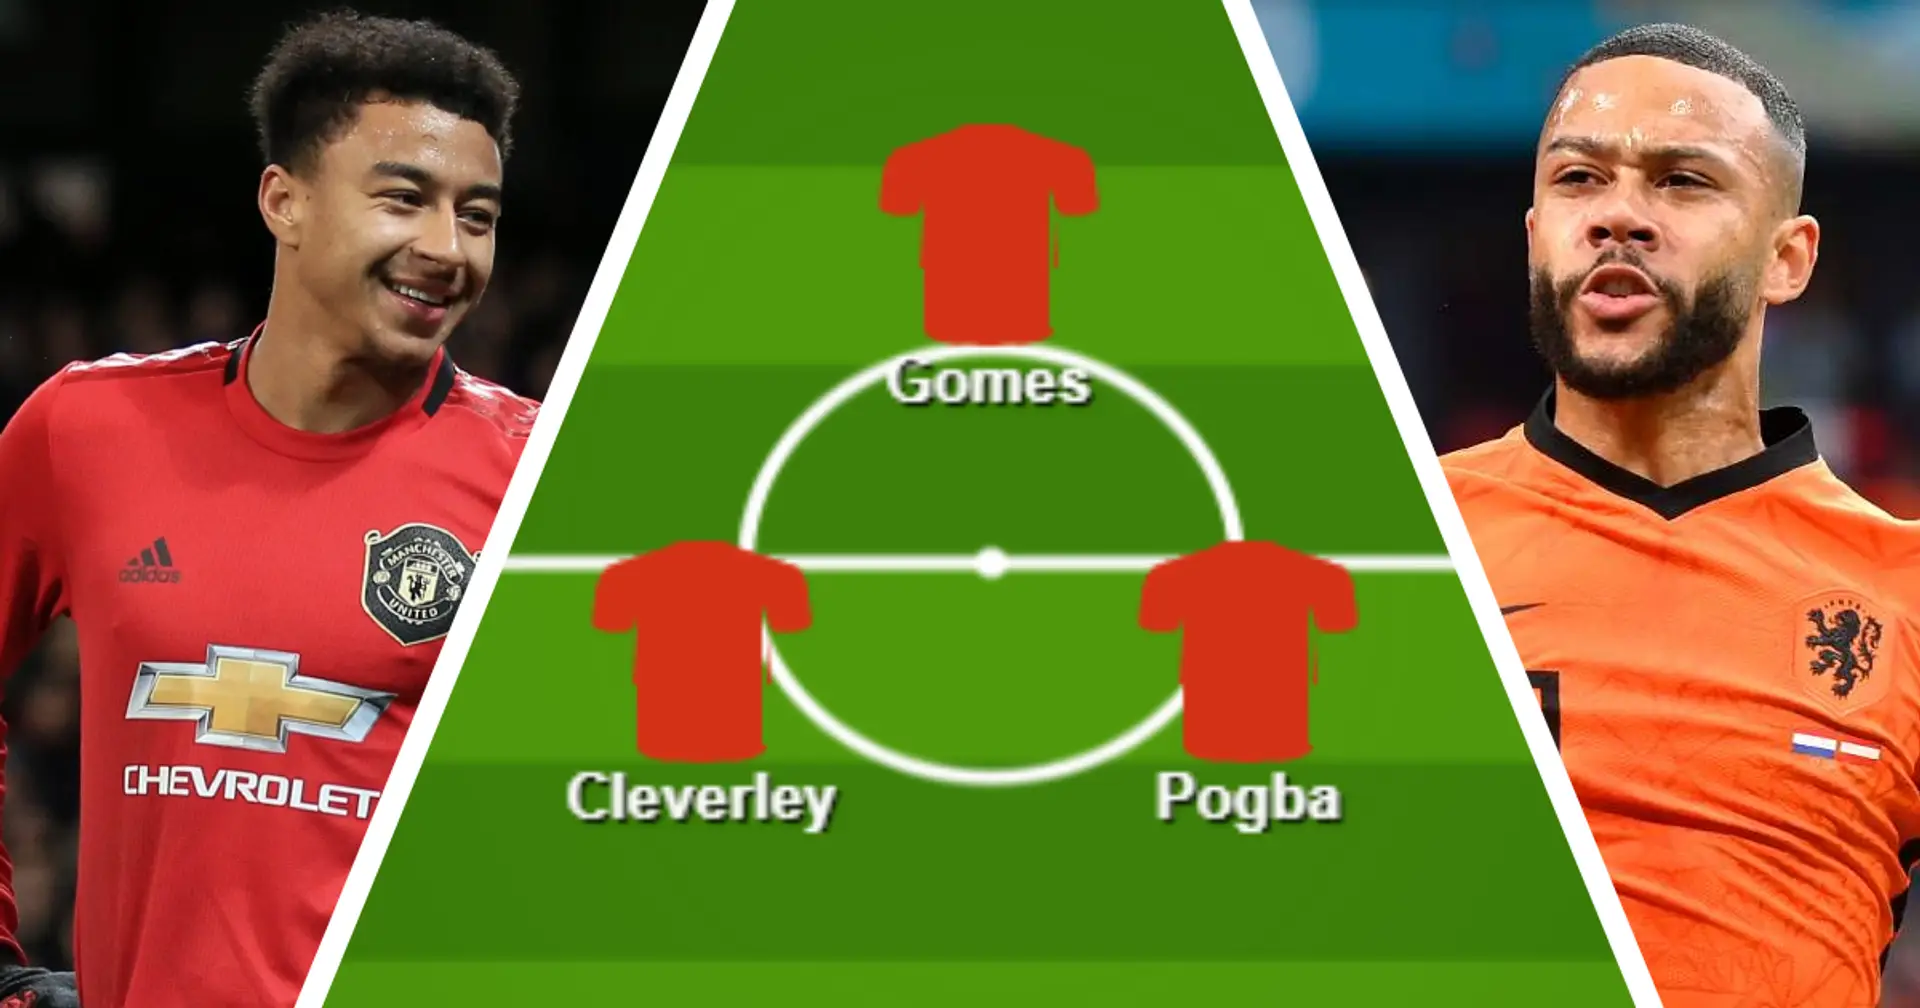 J-Lingz at left-back, Depay on right wing: What United's starting XI could look like in an alternate universe